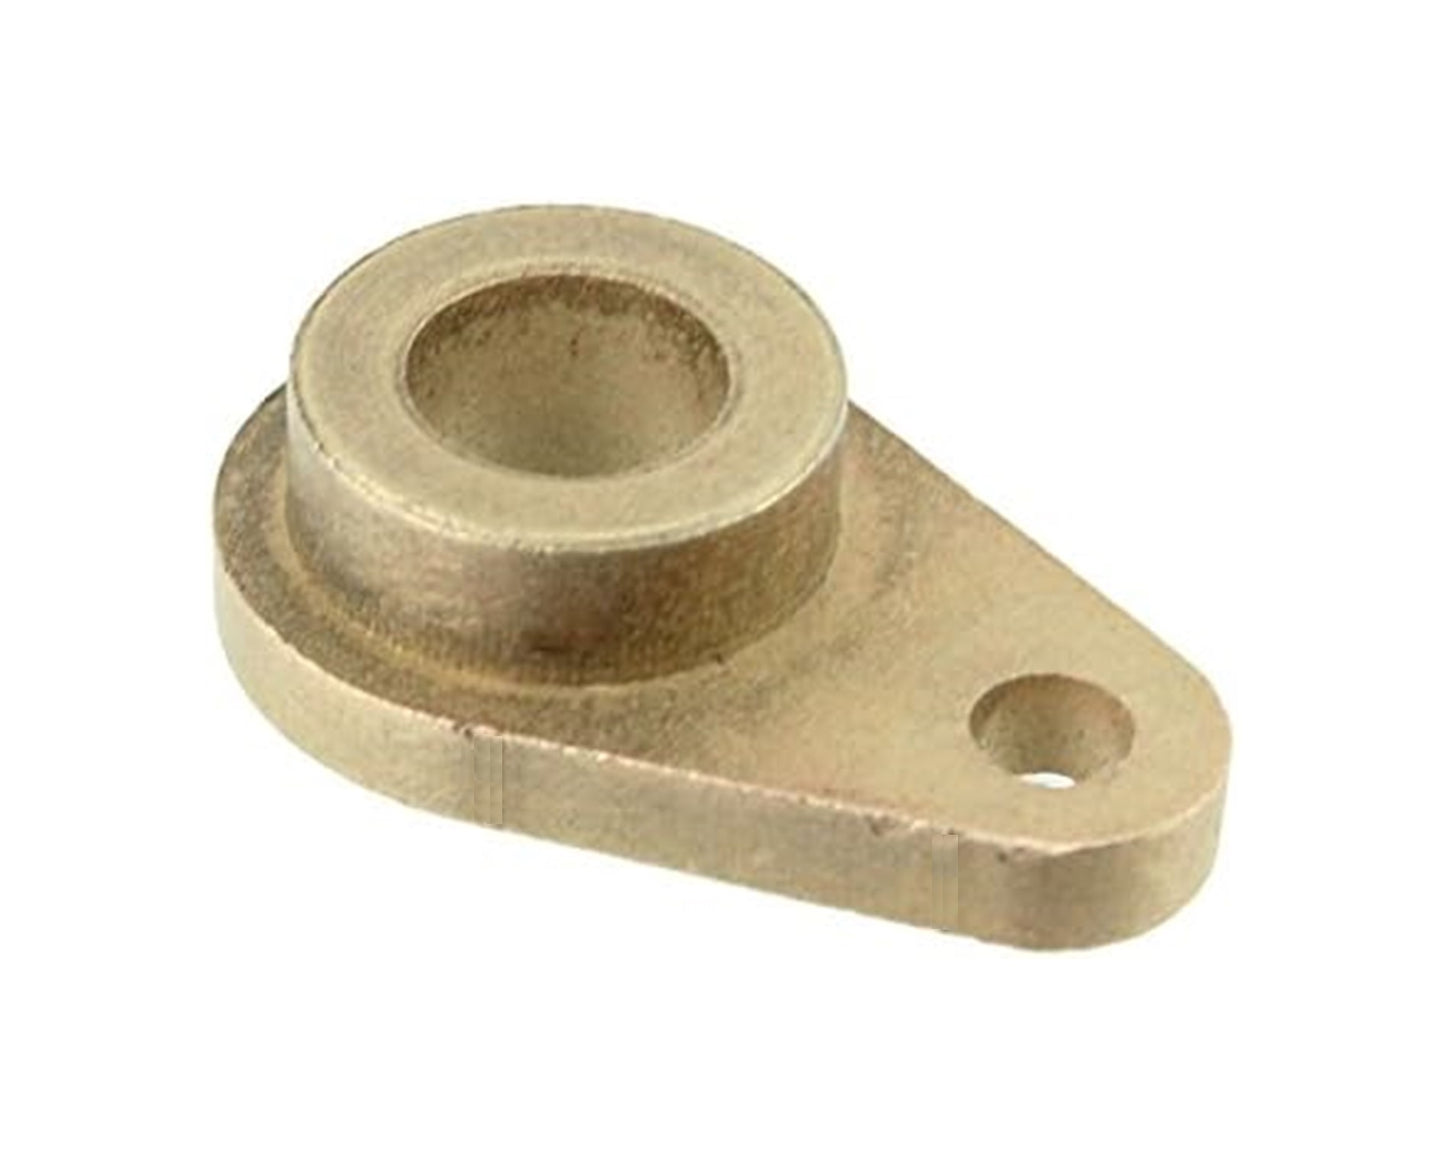 Compatible Tumble Dryer Teardrop Bearing for Hotpoint Creda Indesit C00142628